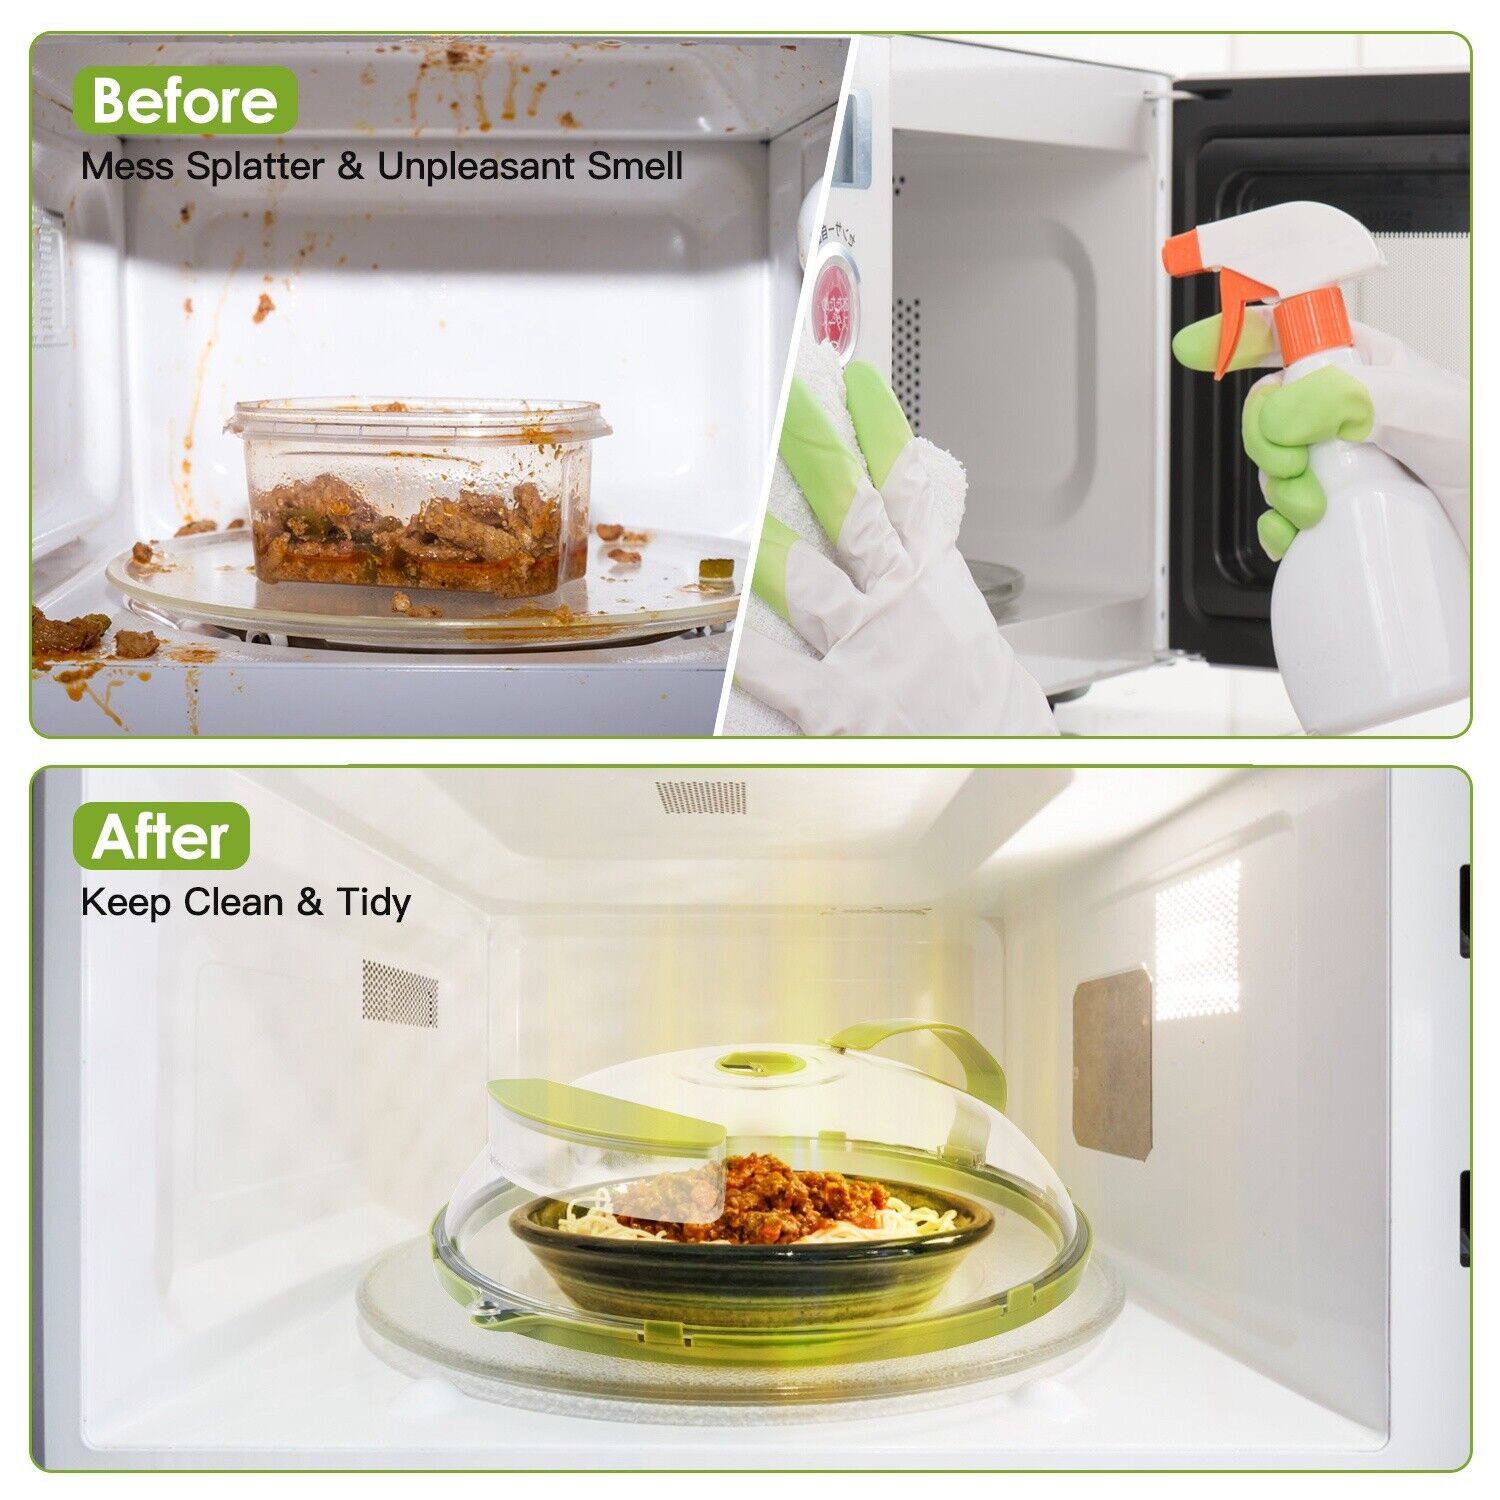 2Pcs Microwave Food Cover Splatter Proof Vented With Easy Grip Hand Protector- Heavy Duty